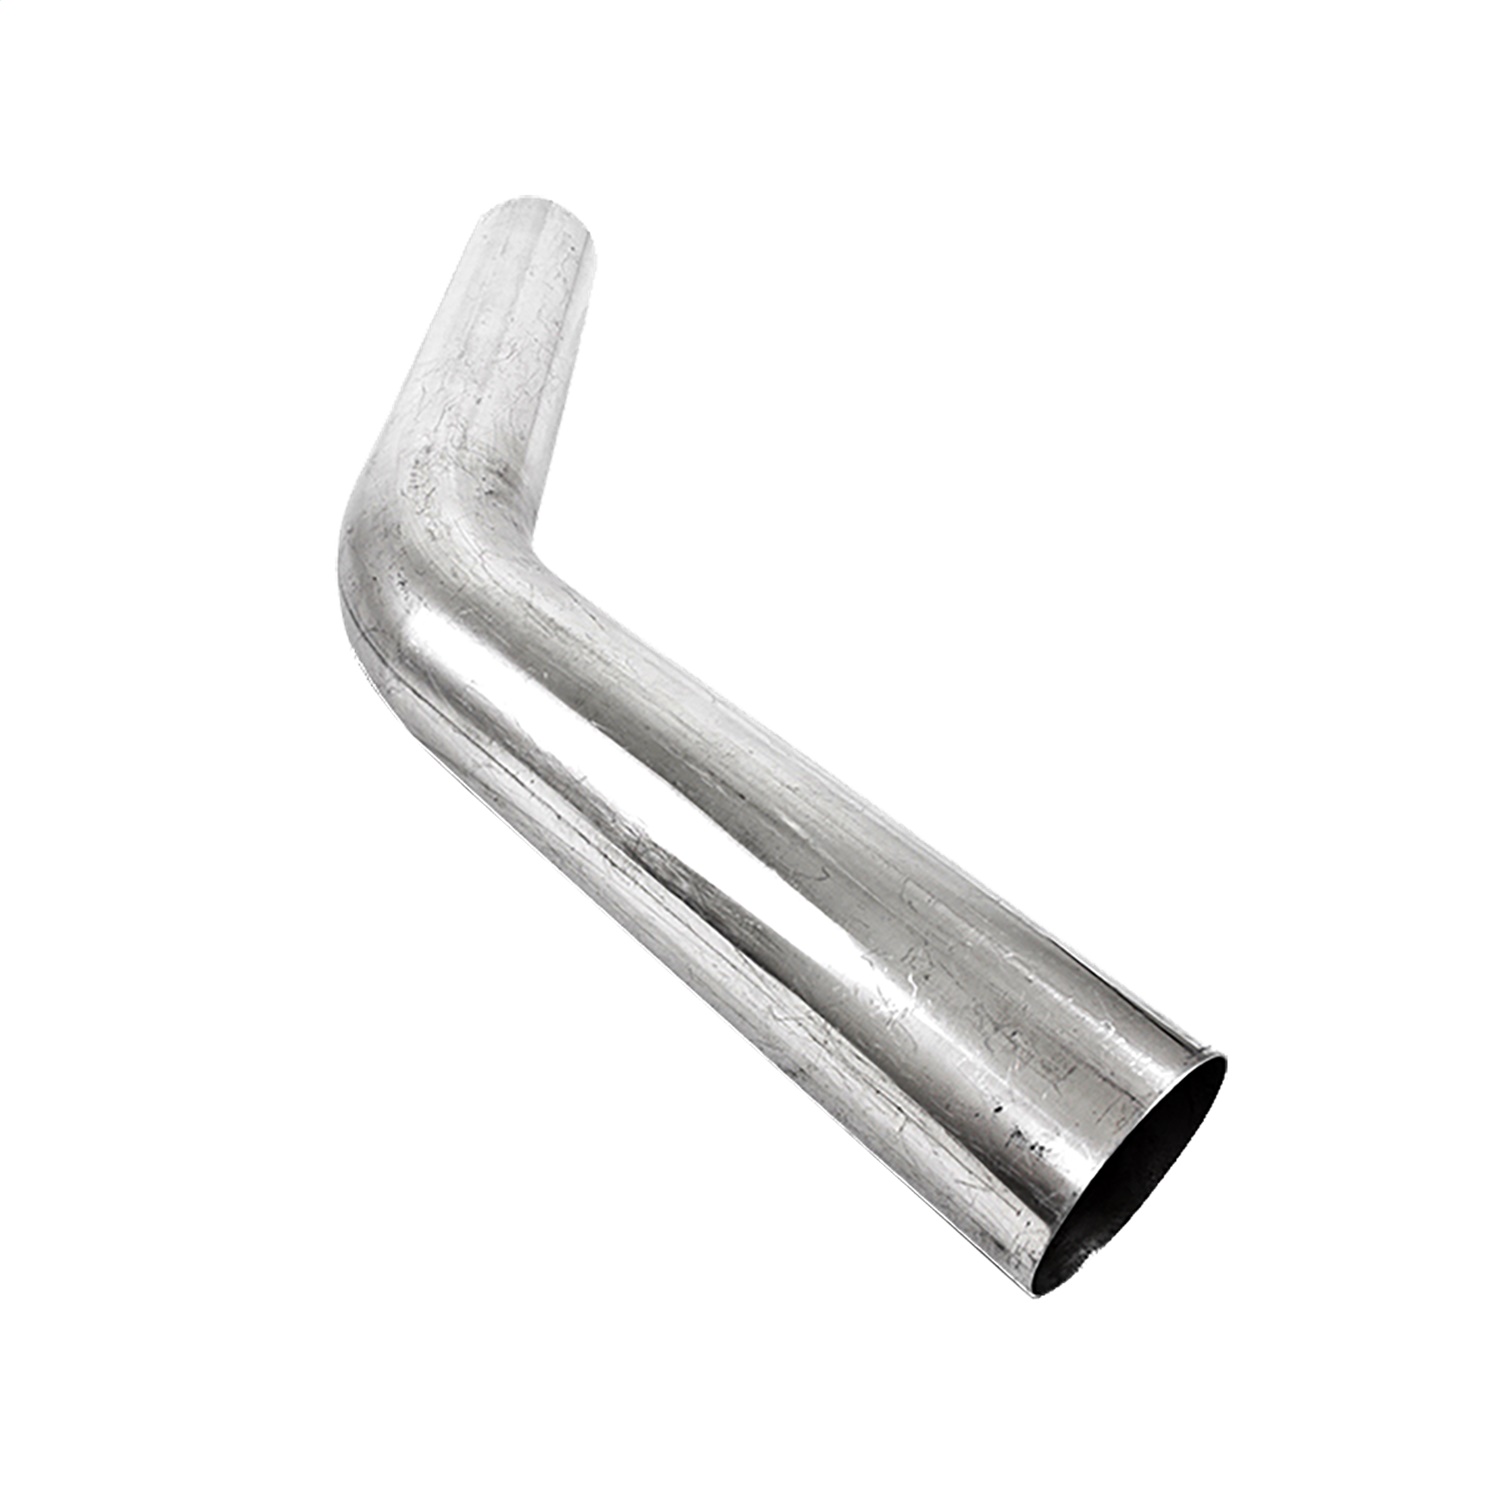 MBRP Exhaust MBRP Exhaust MB1022 Garage Parts; Pro Series Smooth Mandrel Bend Pipe